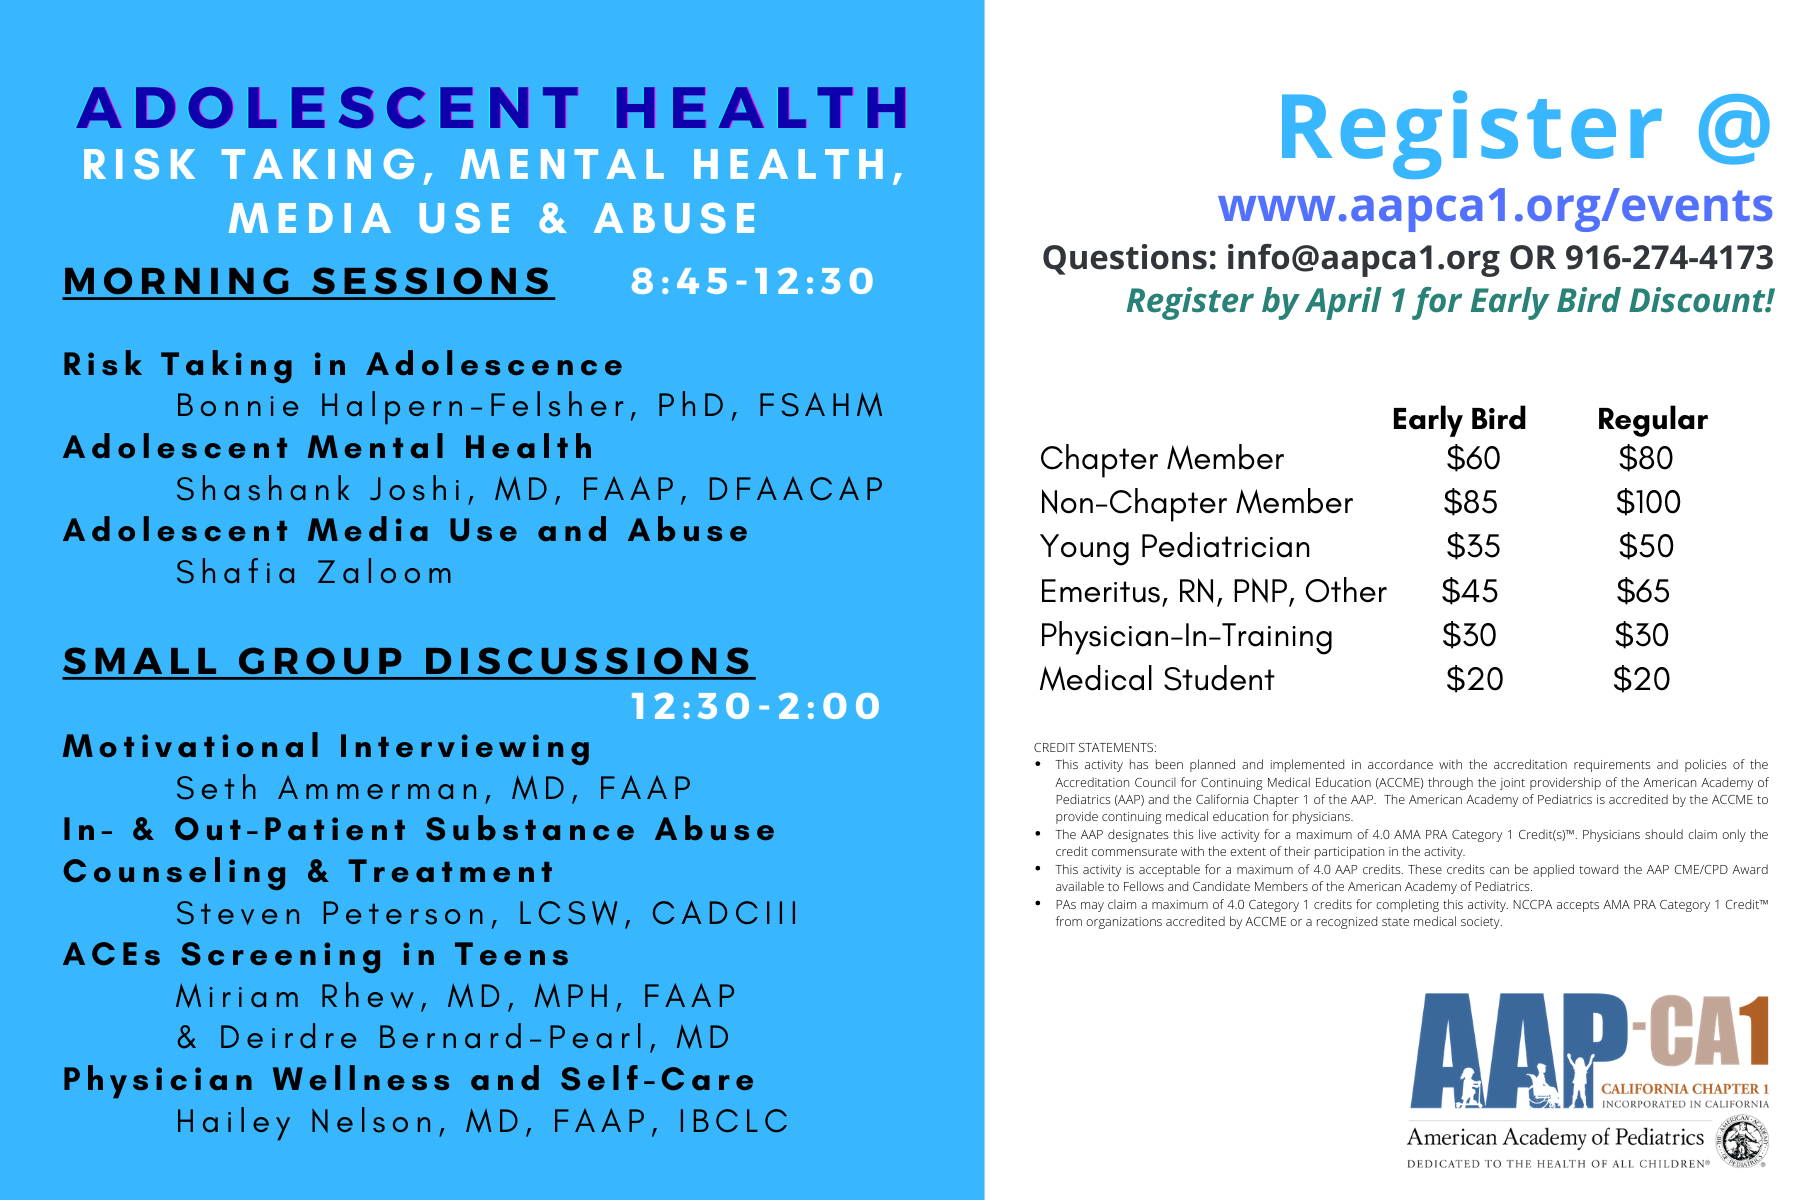 Annual Spring CME Conference Adolescent Health American Academy of